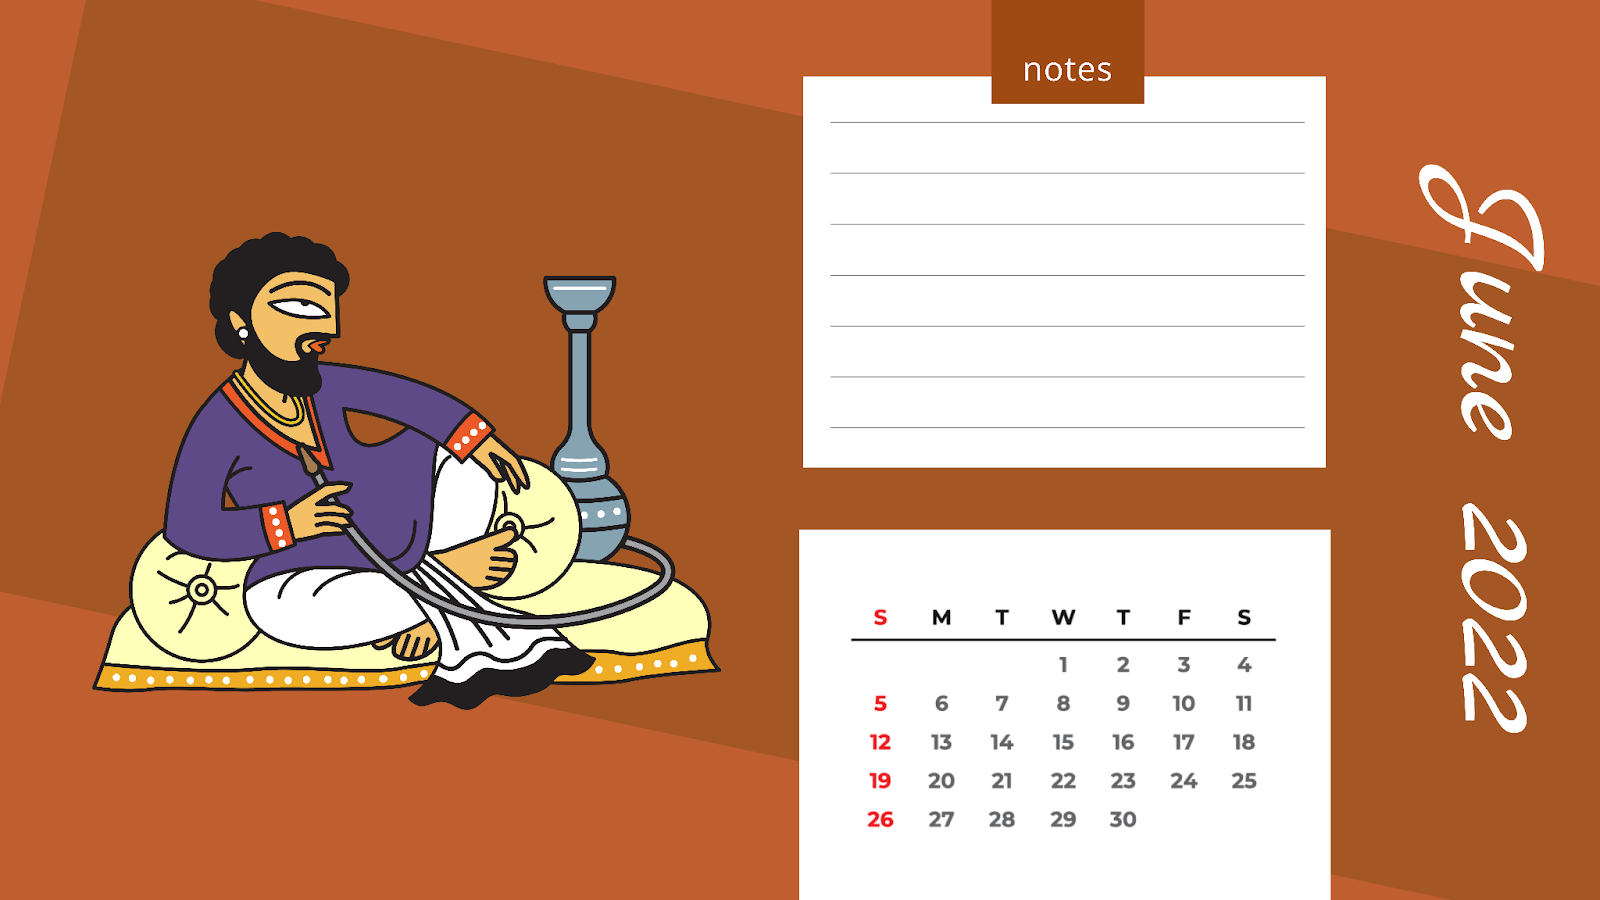 Customized Calendar June month with DrawHipo's Art of Bengal Illustrations  